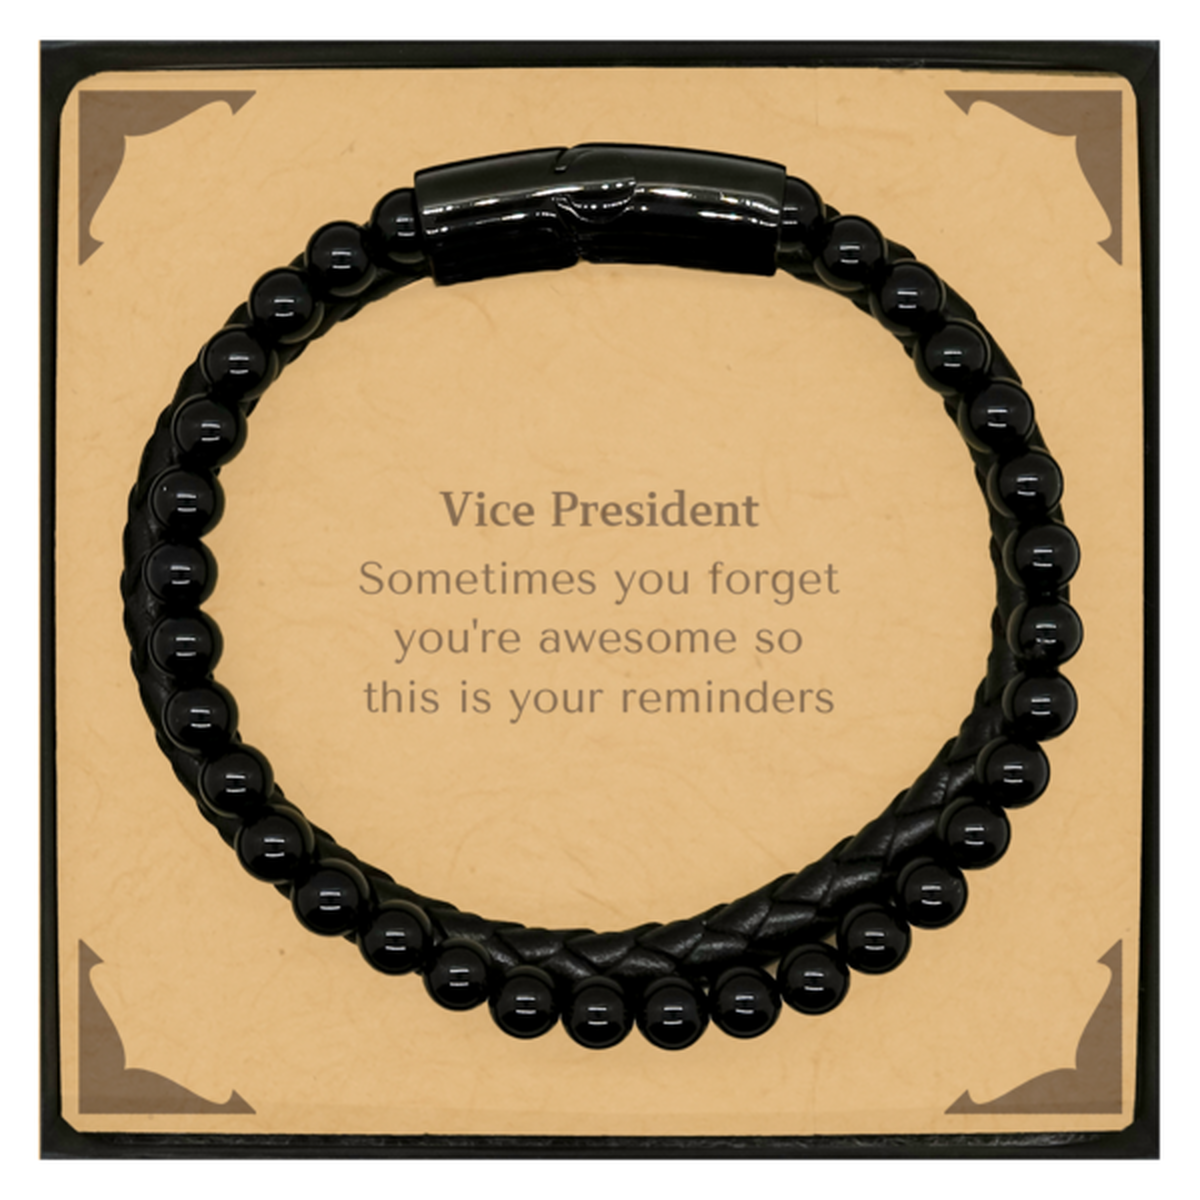 Sentimental Vice President Stone Leather Bracelets, Vice President Sometimes you forget you're awesome so this is your reminders, Graduation Christmas Birthday Gifts for Vice President, Men, Women, Coworkers